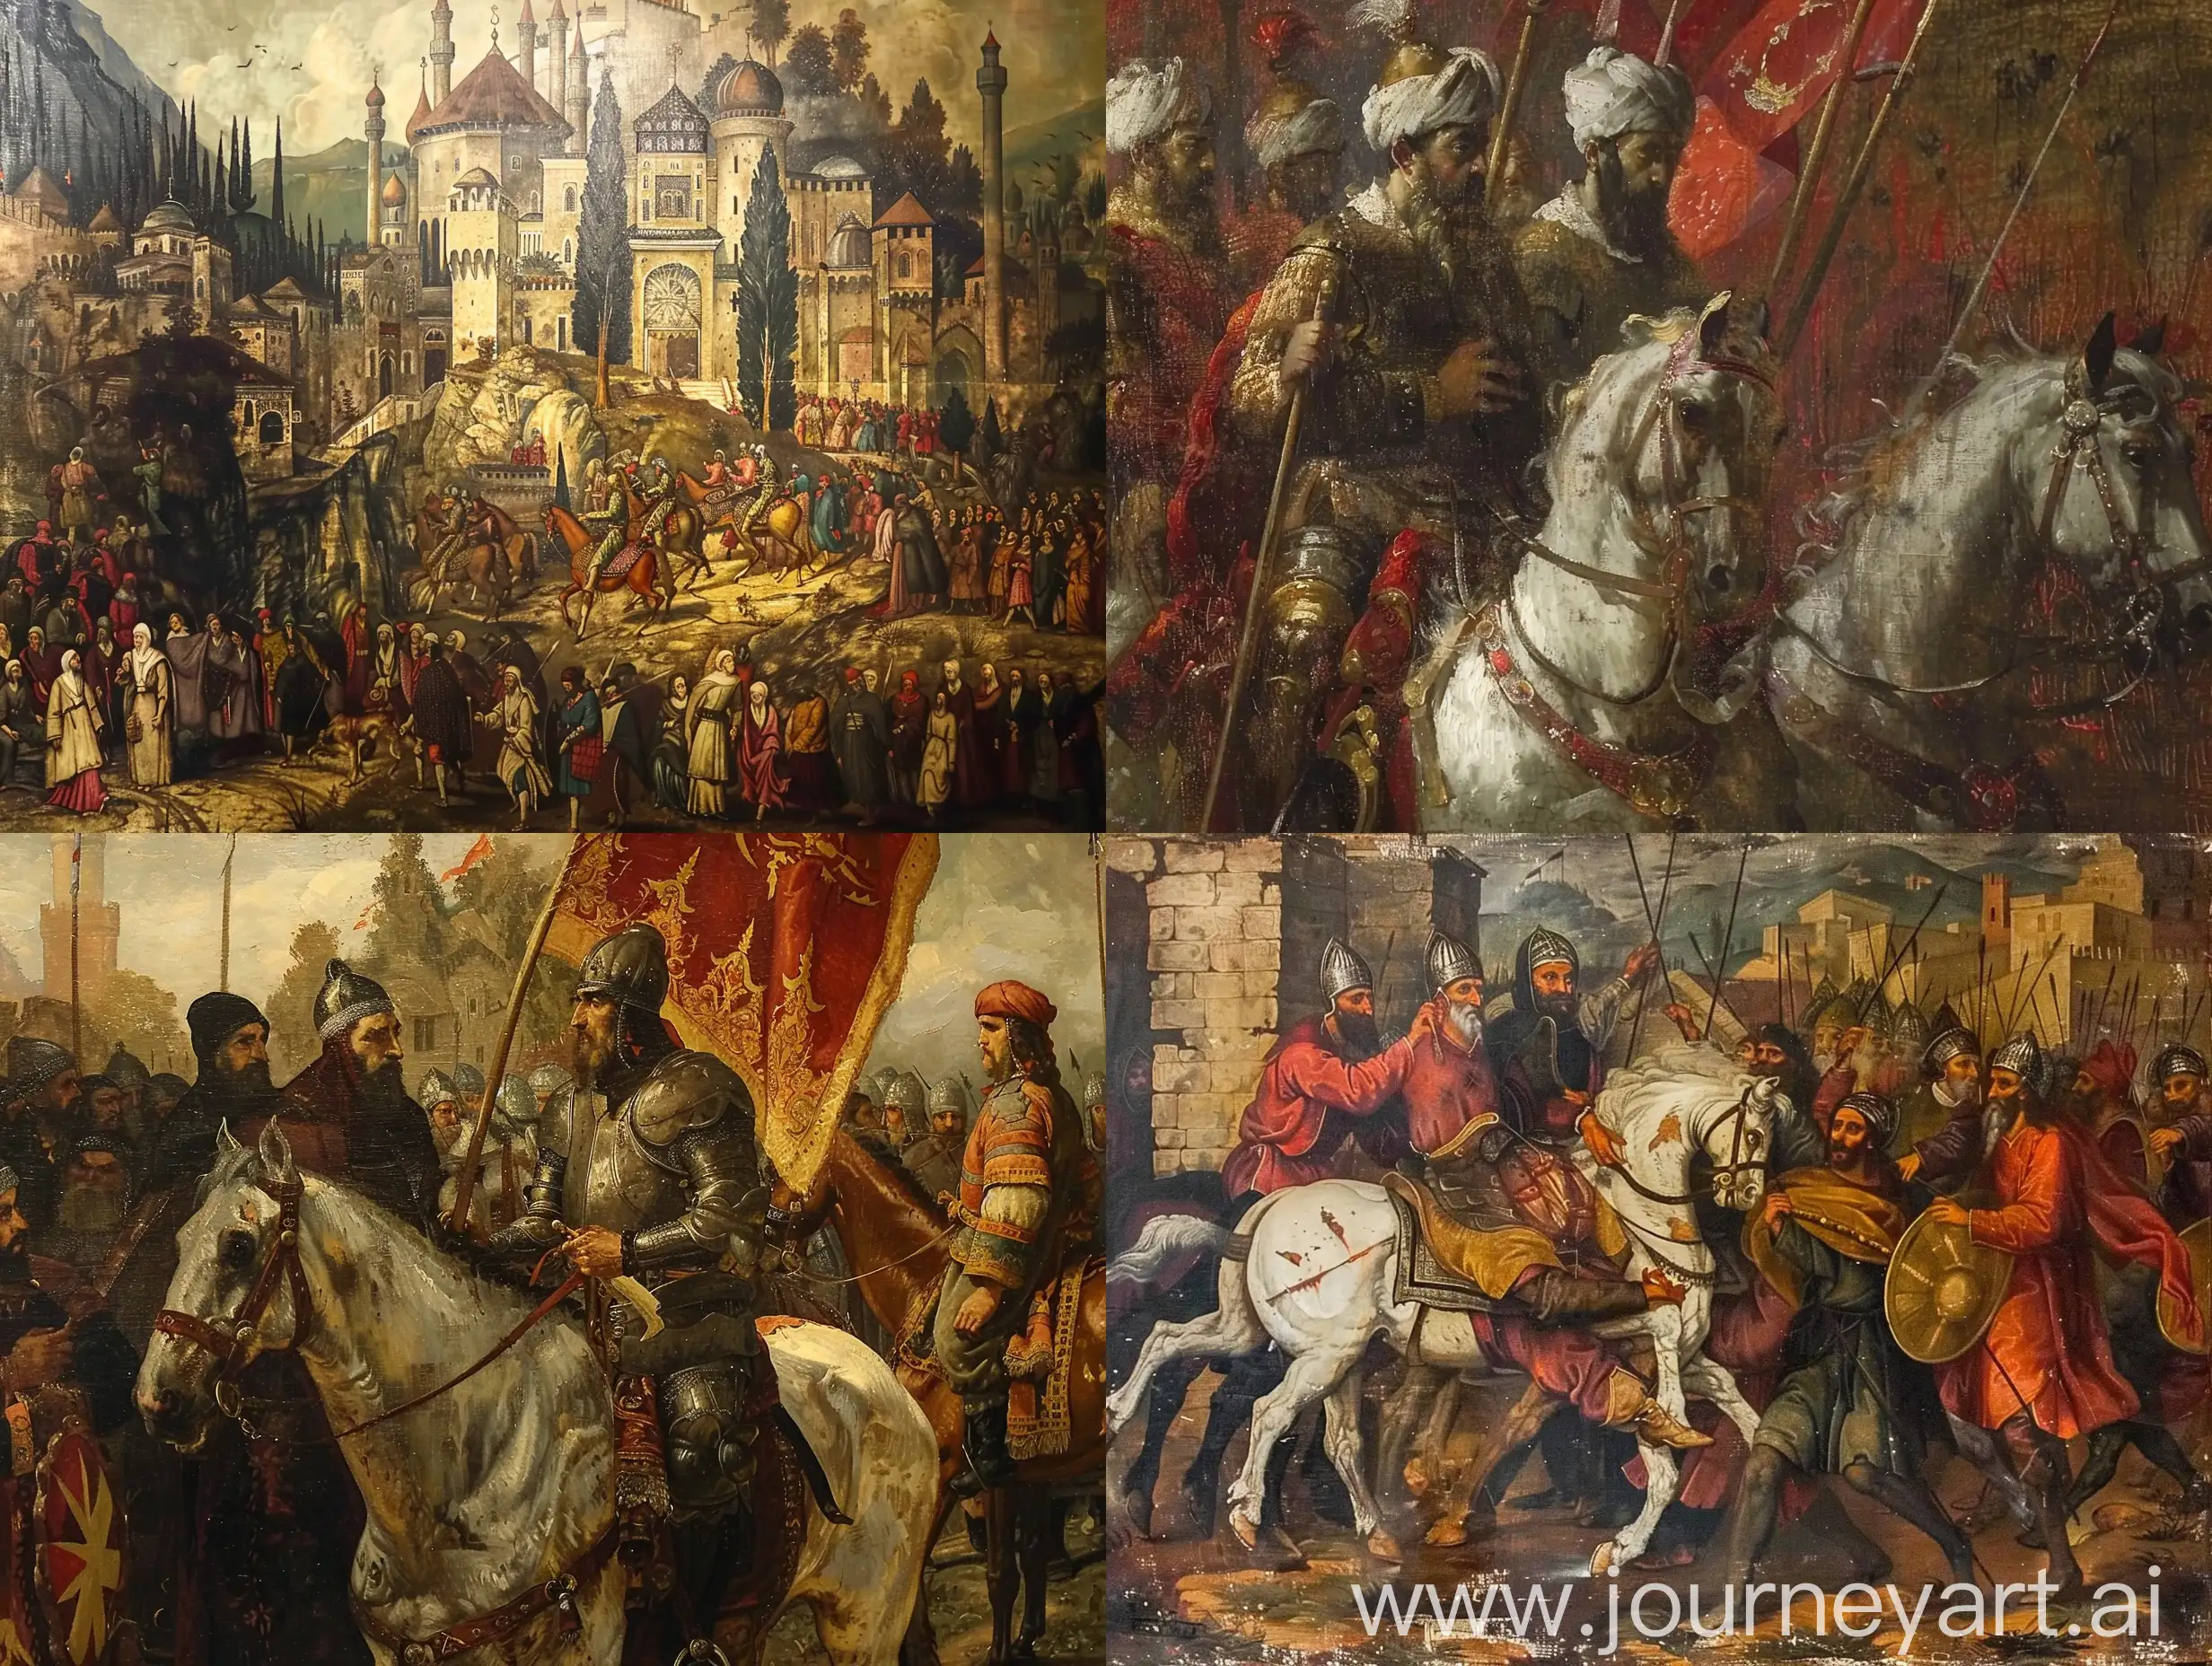 Balkan-Turk-Genocide-Depicted-in-Renaissance-Style-Oil-Painting